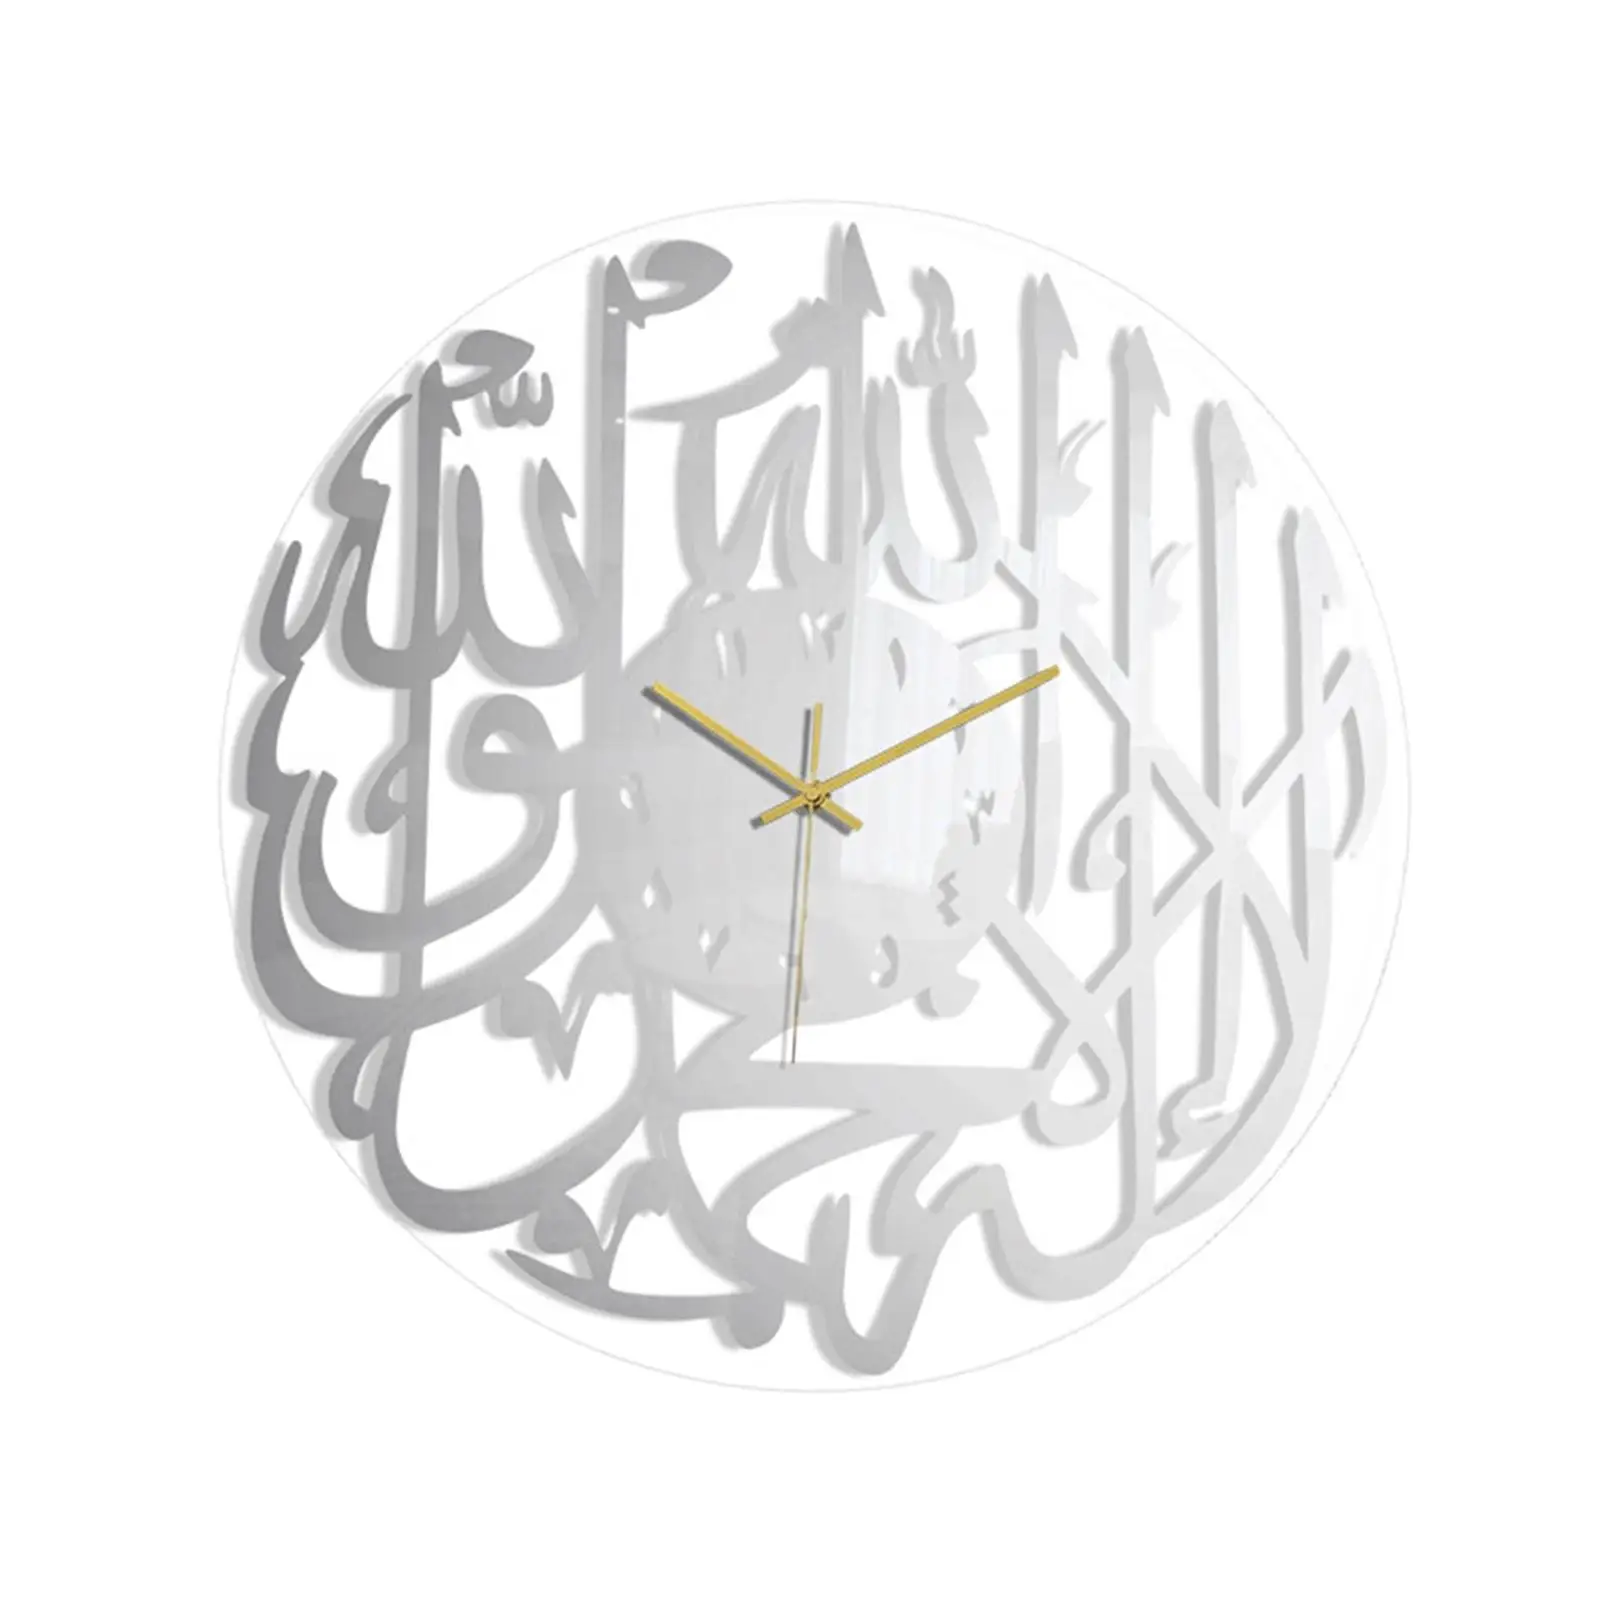 Wall Art Acrylic Wall Clock Hanging Clock with Arabic Numbers Lightweight Modern Design for Bathroom decor kitchen Room